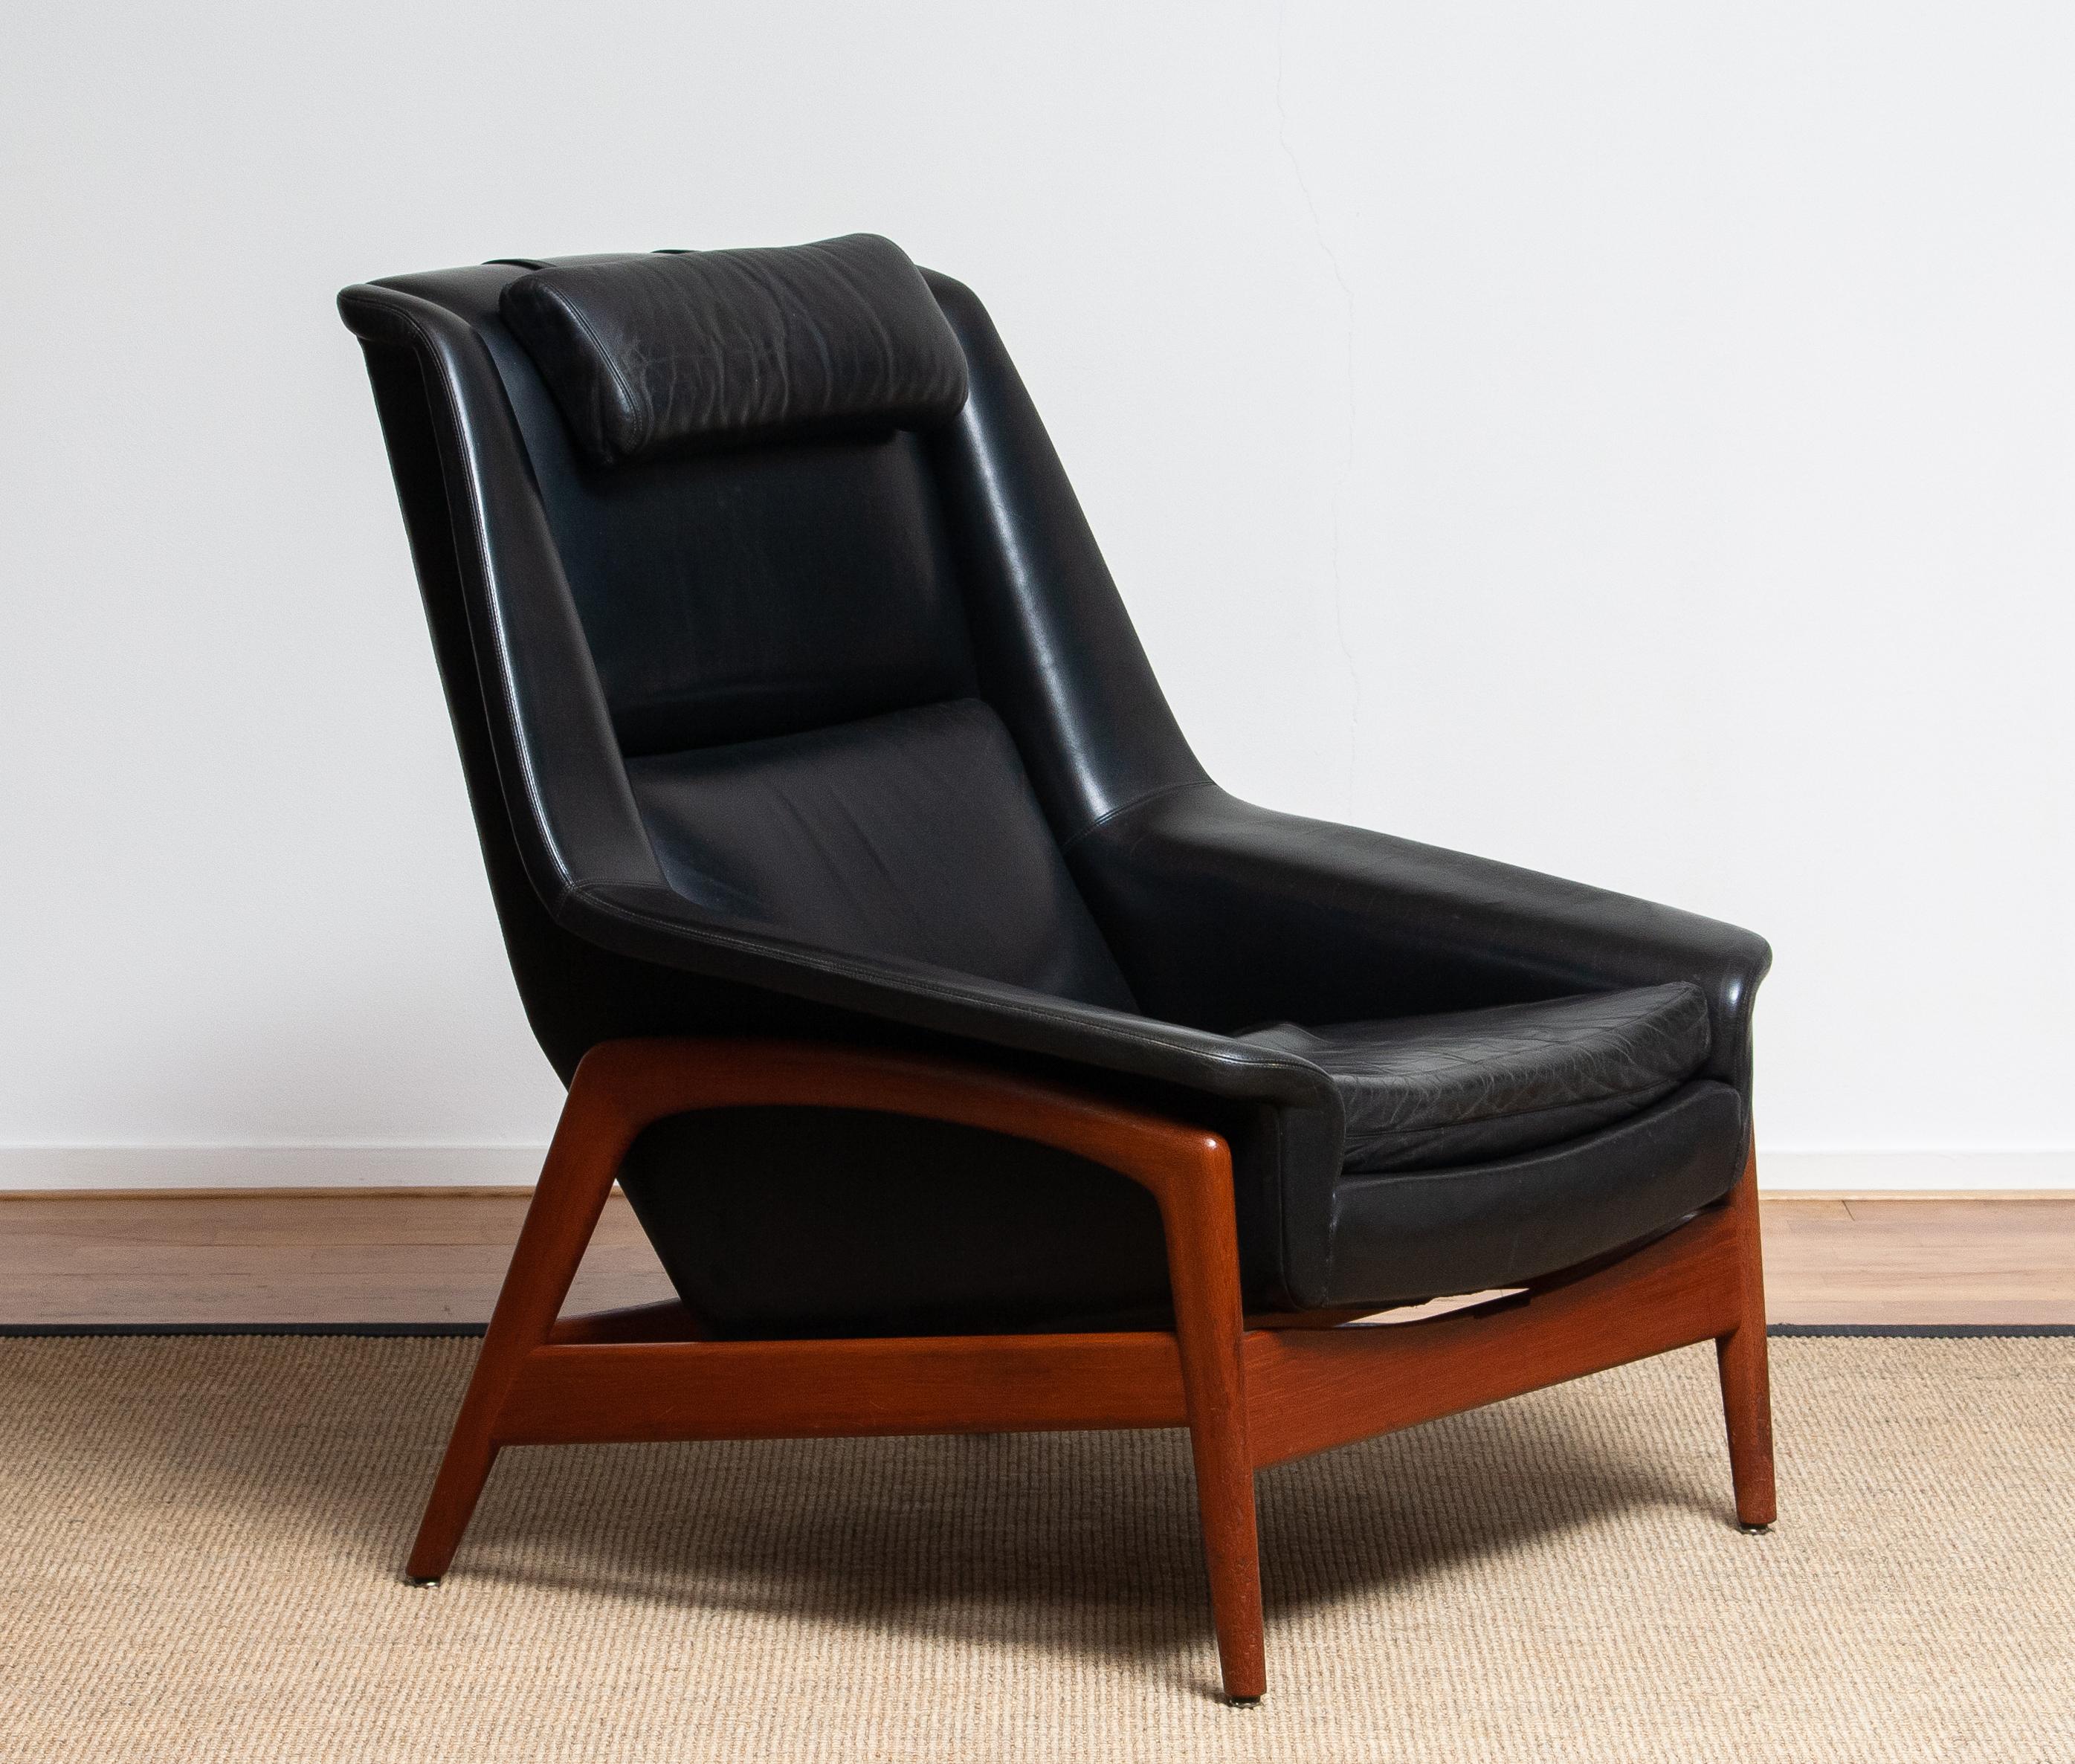 Stunning easy / lounge chair in teak and upholstered in black leather by Folke Ohlsson for DUX Sweden,
Model; Profil
Overall in good condition.